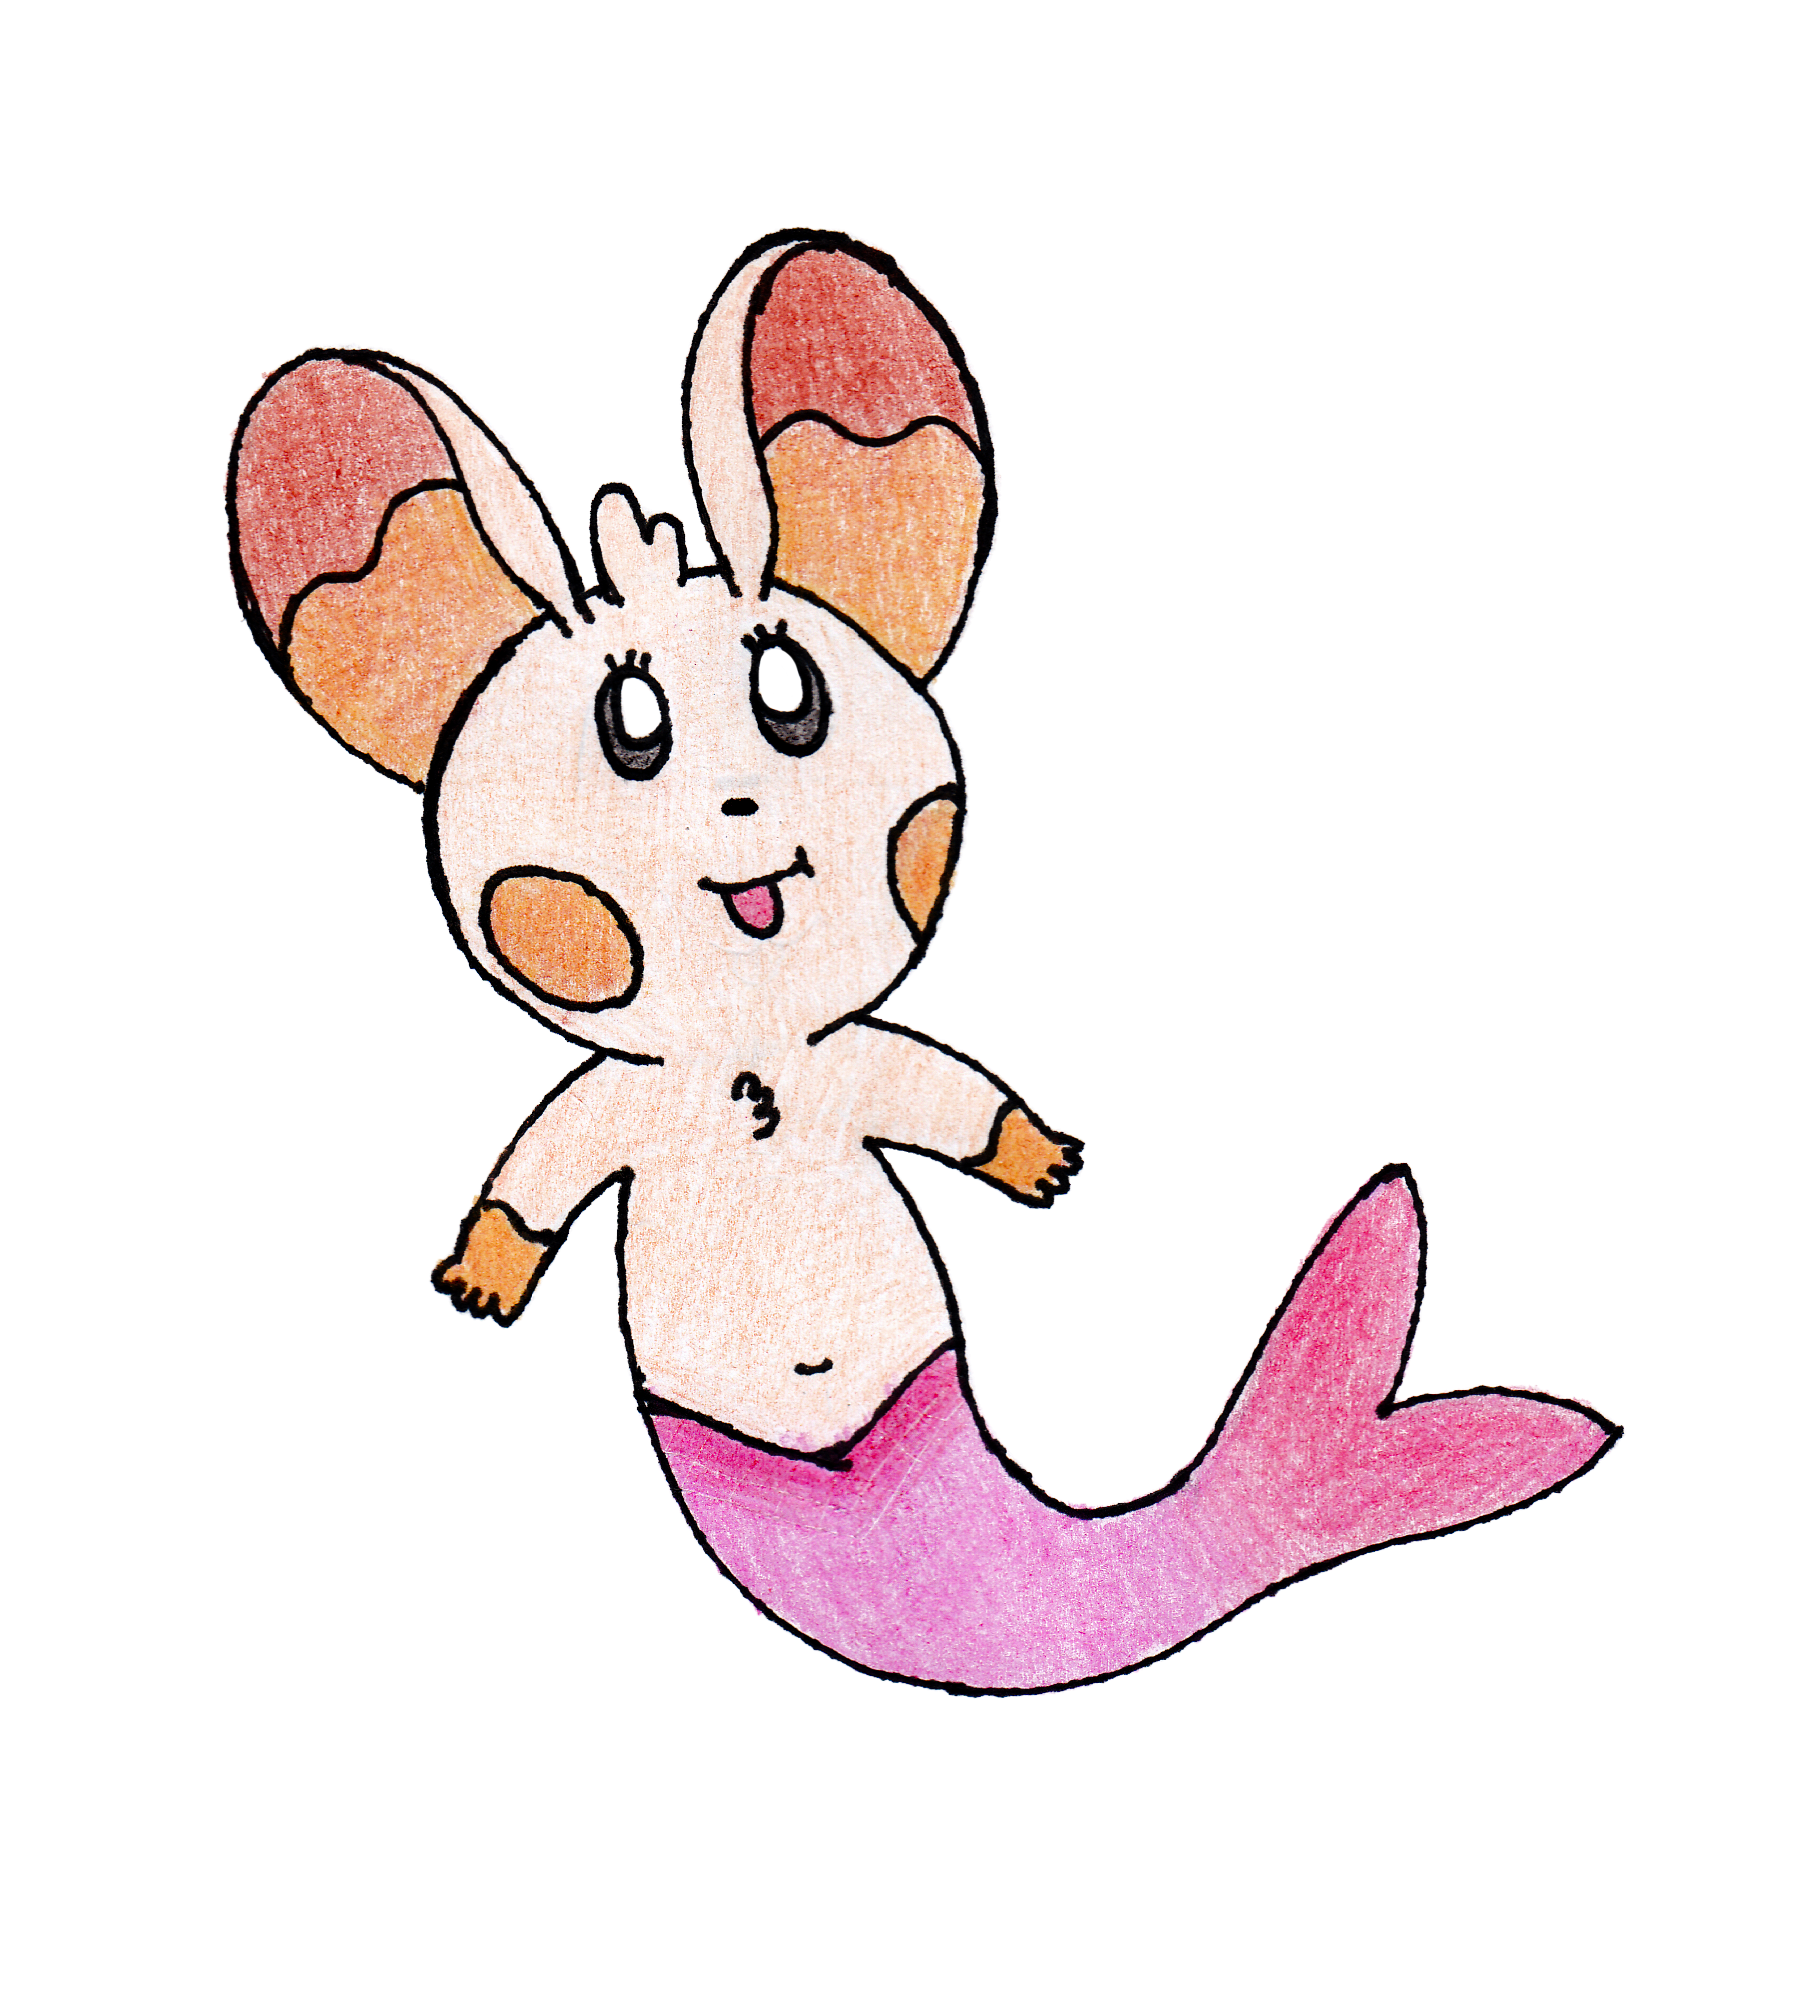 Aidan the Mouse turned into a Mermaid with a bright pink tail